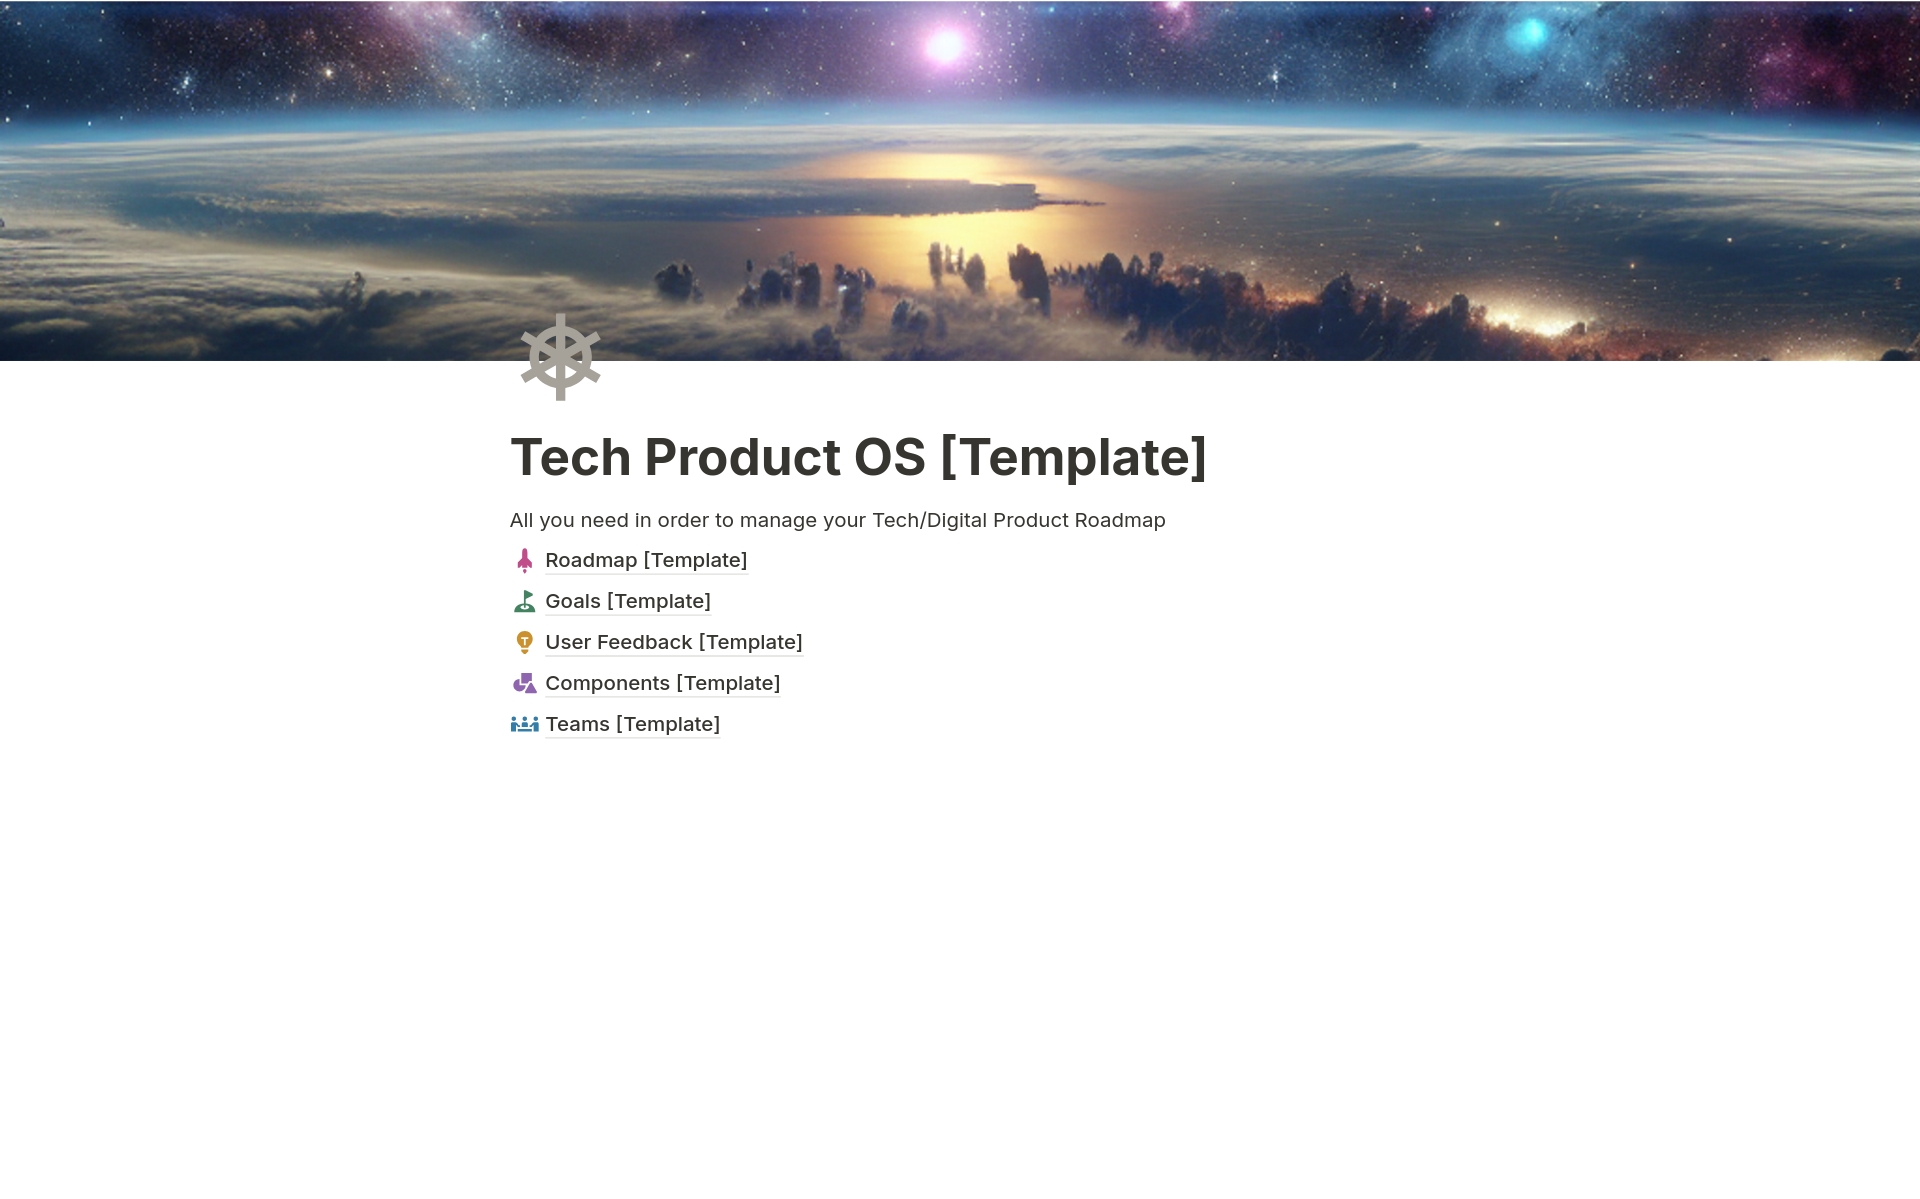 A template preview for Tech Product OS